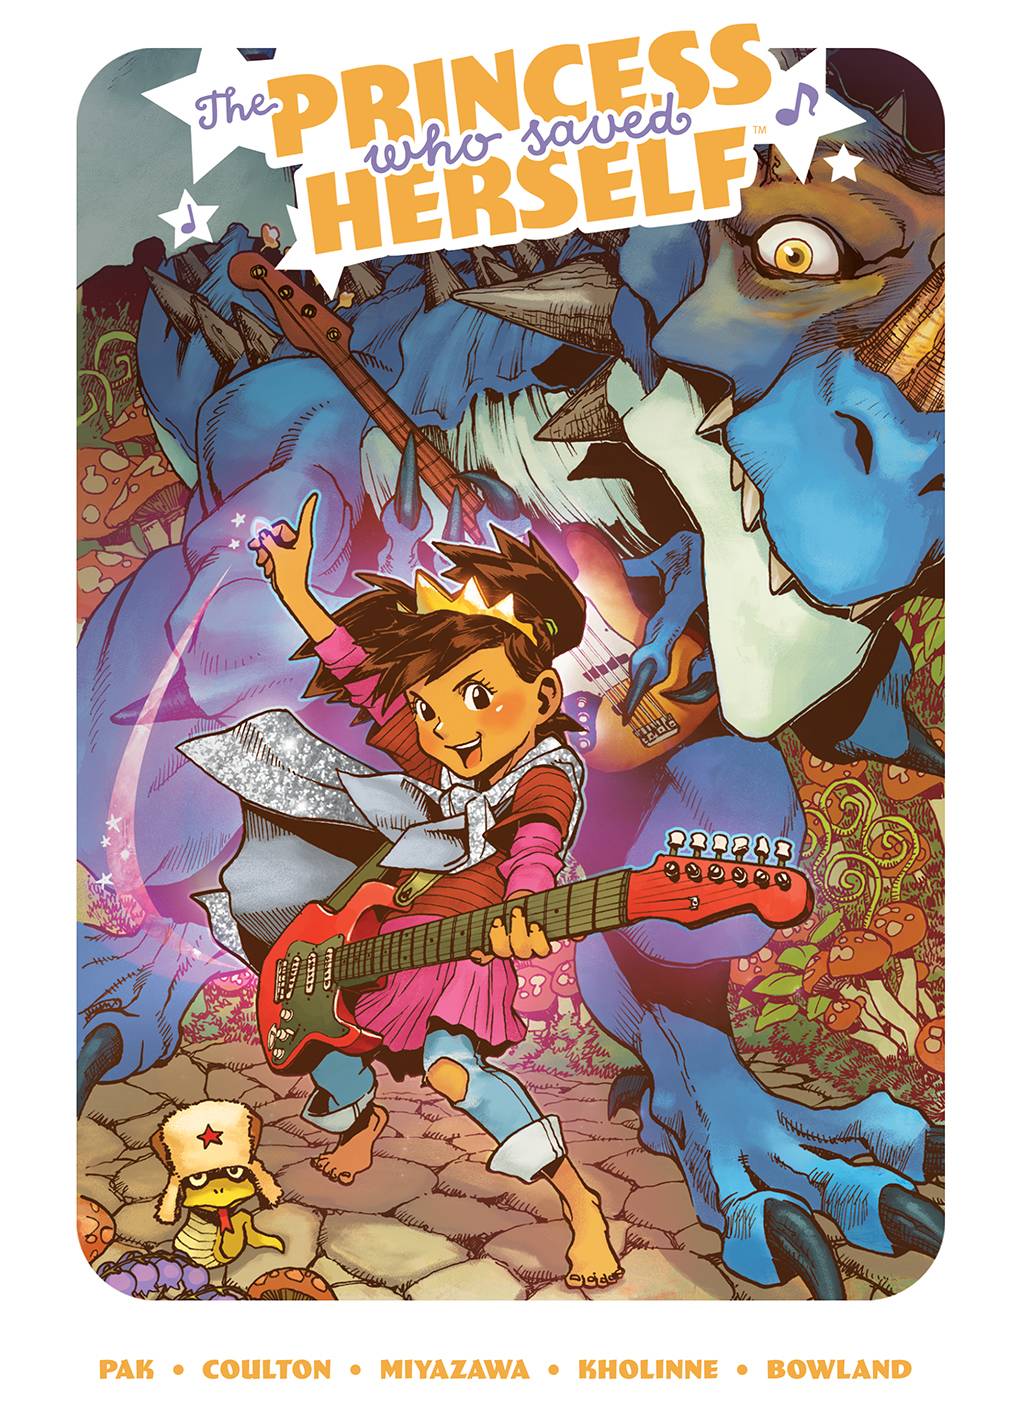 A young girl with light brown skin, brown eyes, and dark brown hair in pigtails stands barefoot on rocks, wearing a mishmash of clothing including a tiara, and playing an electric guitar. Behind her, a large blue dinosaur wraps its claws around another electric guitar, trying to play along.